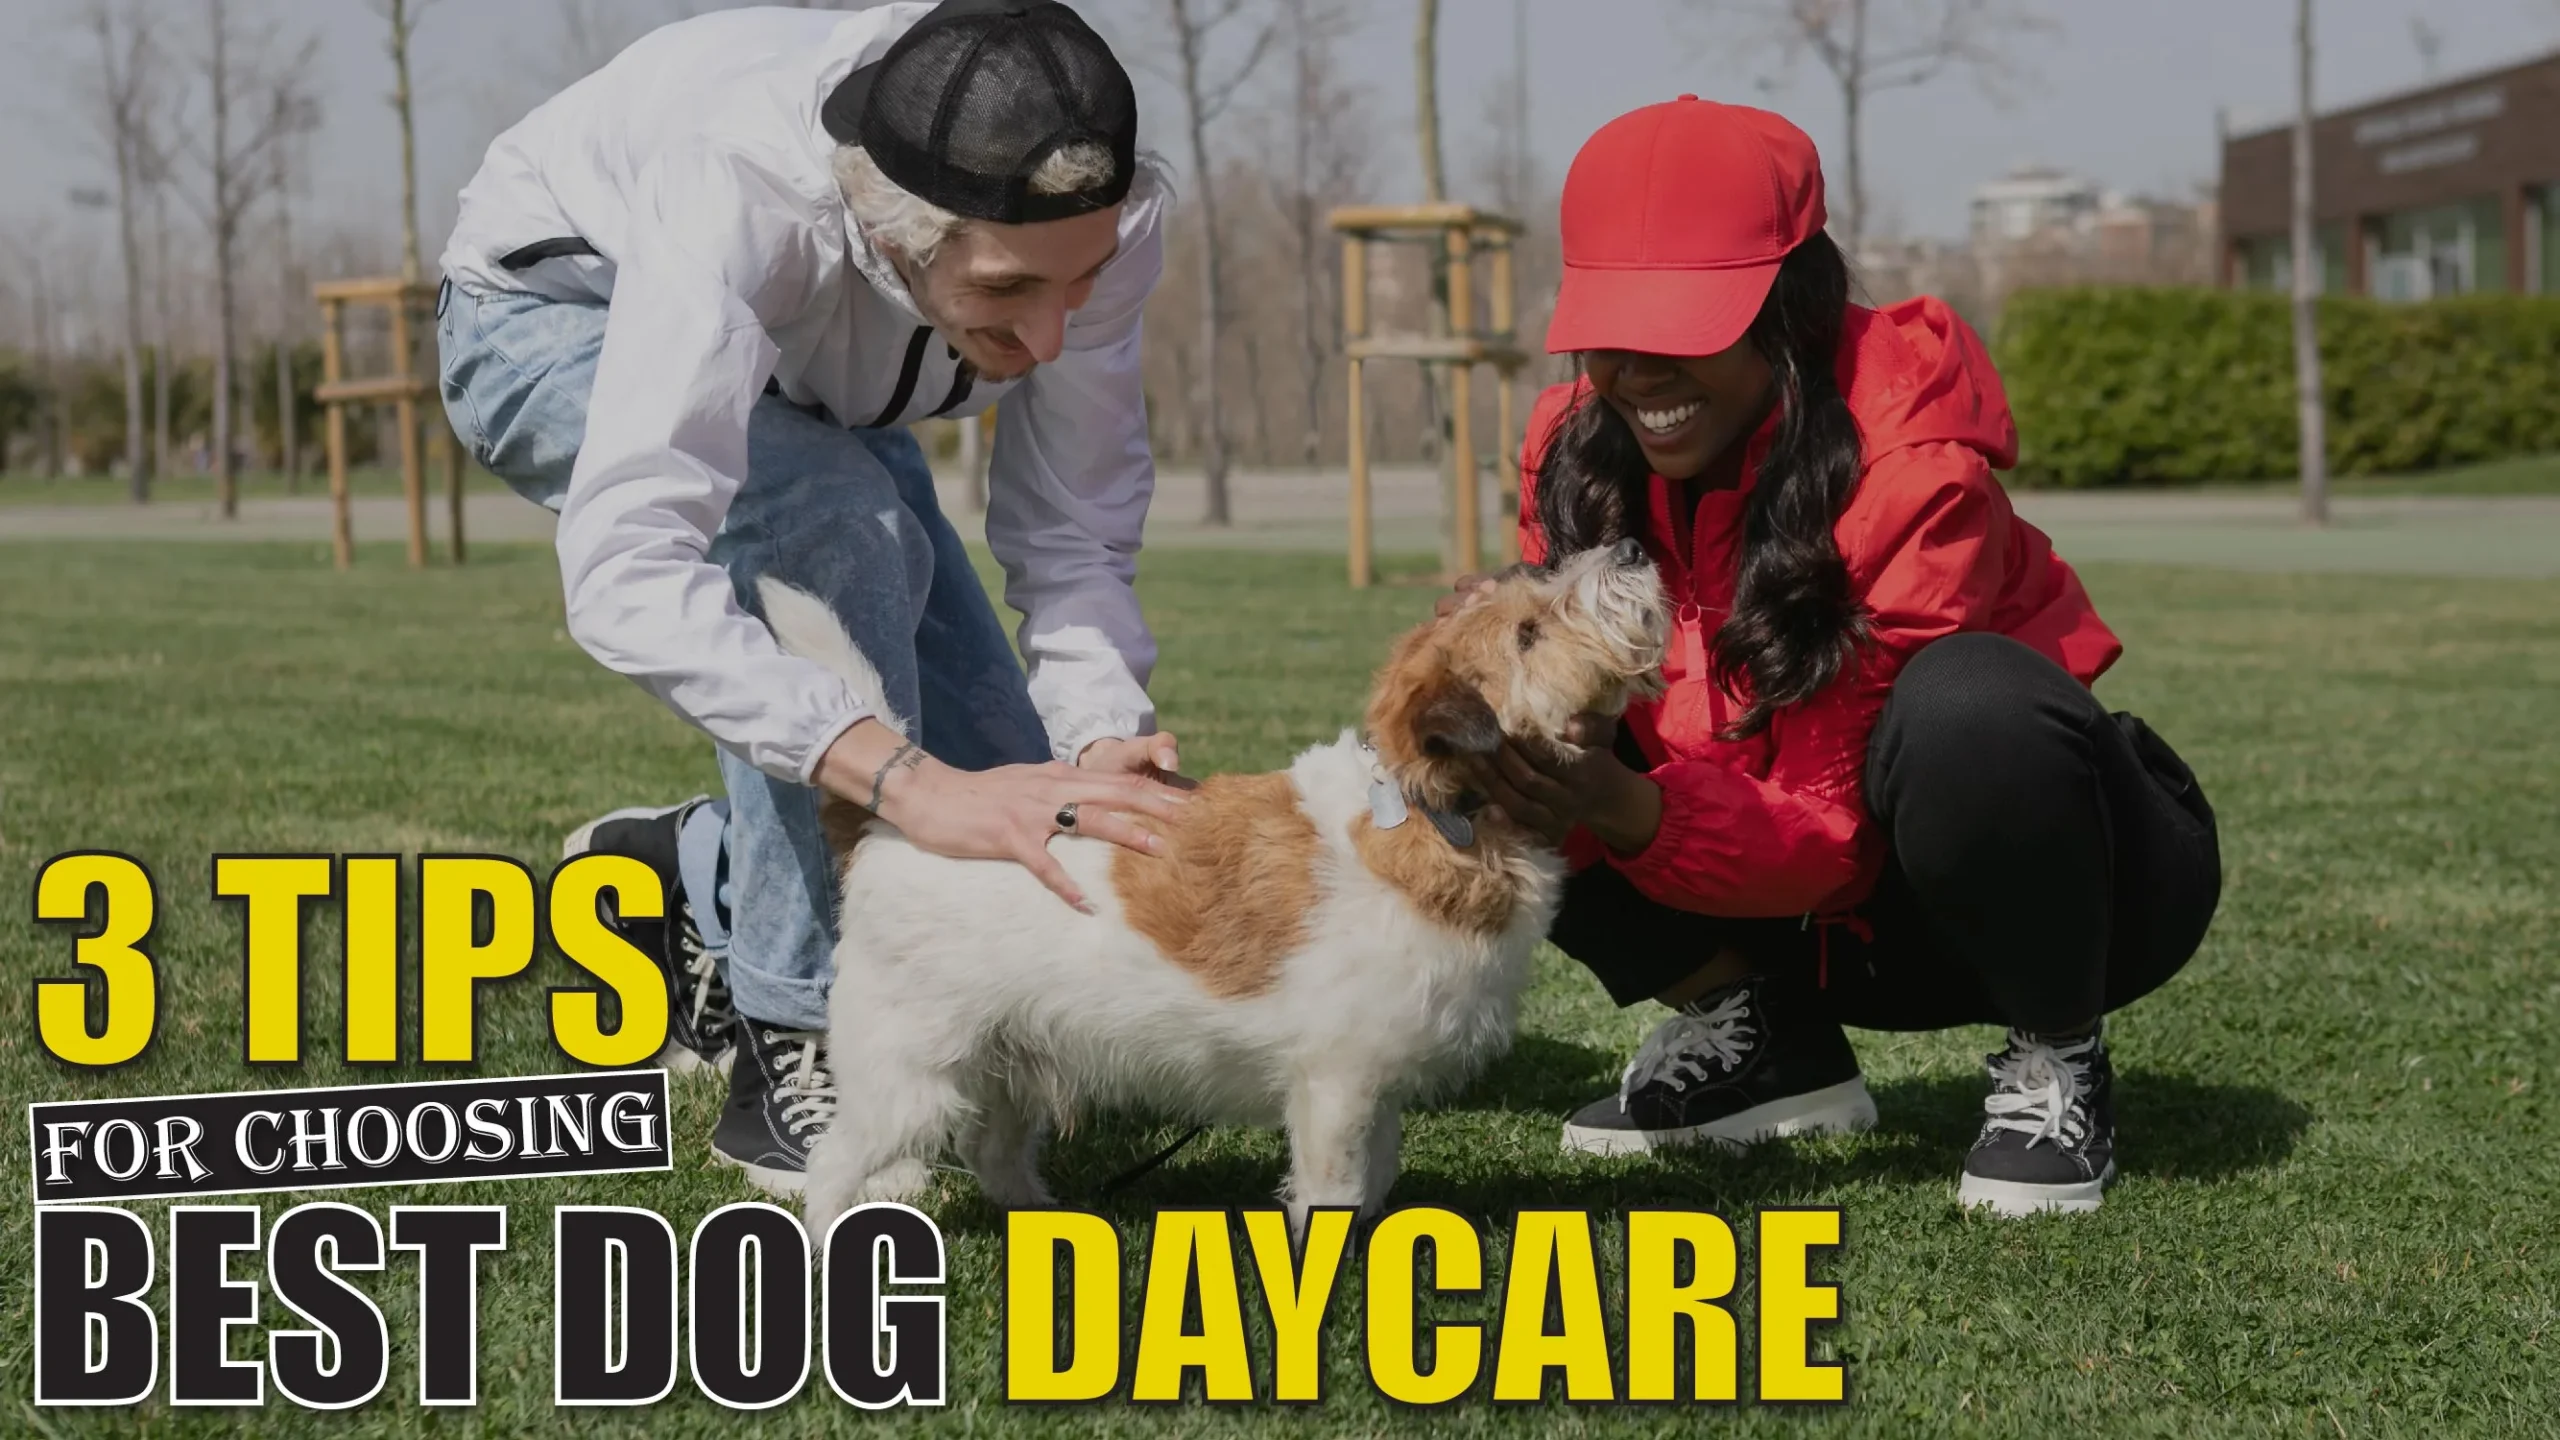 3 Tips for Choosing the Best Dog Daycare